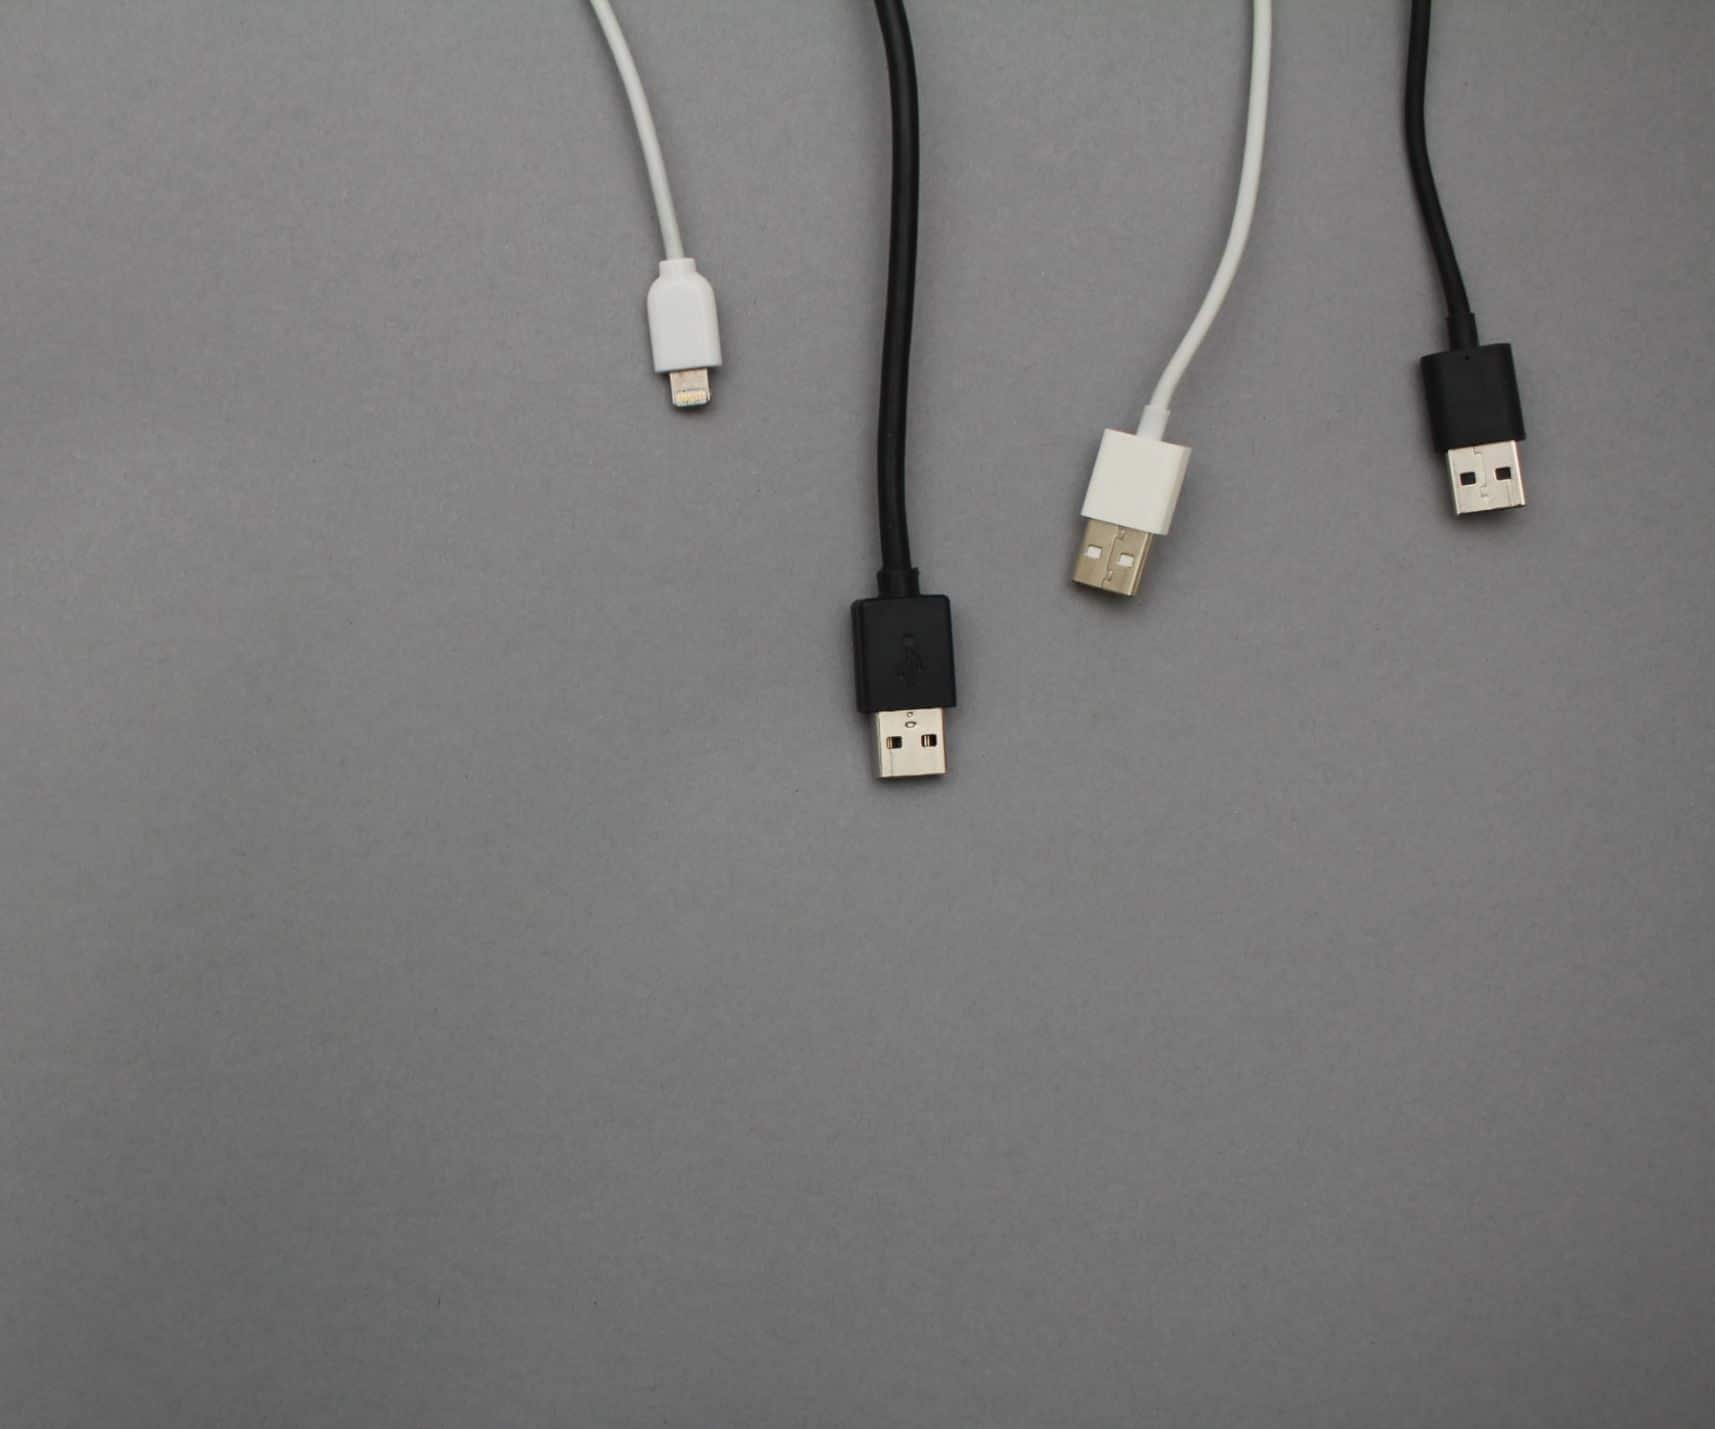 Different USB cables